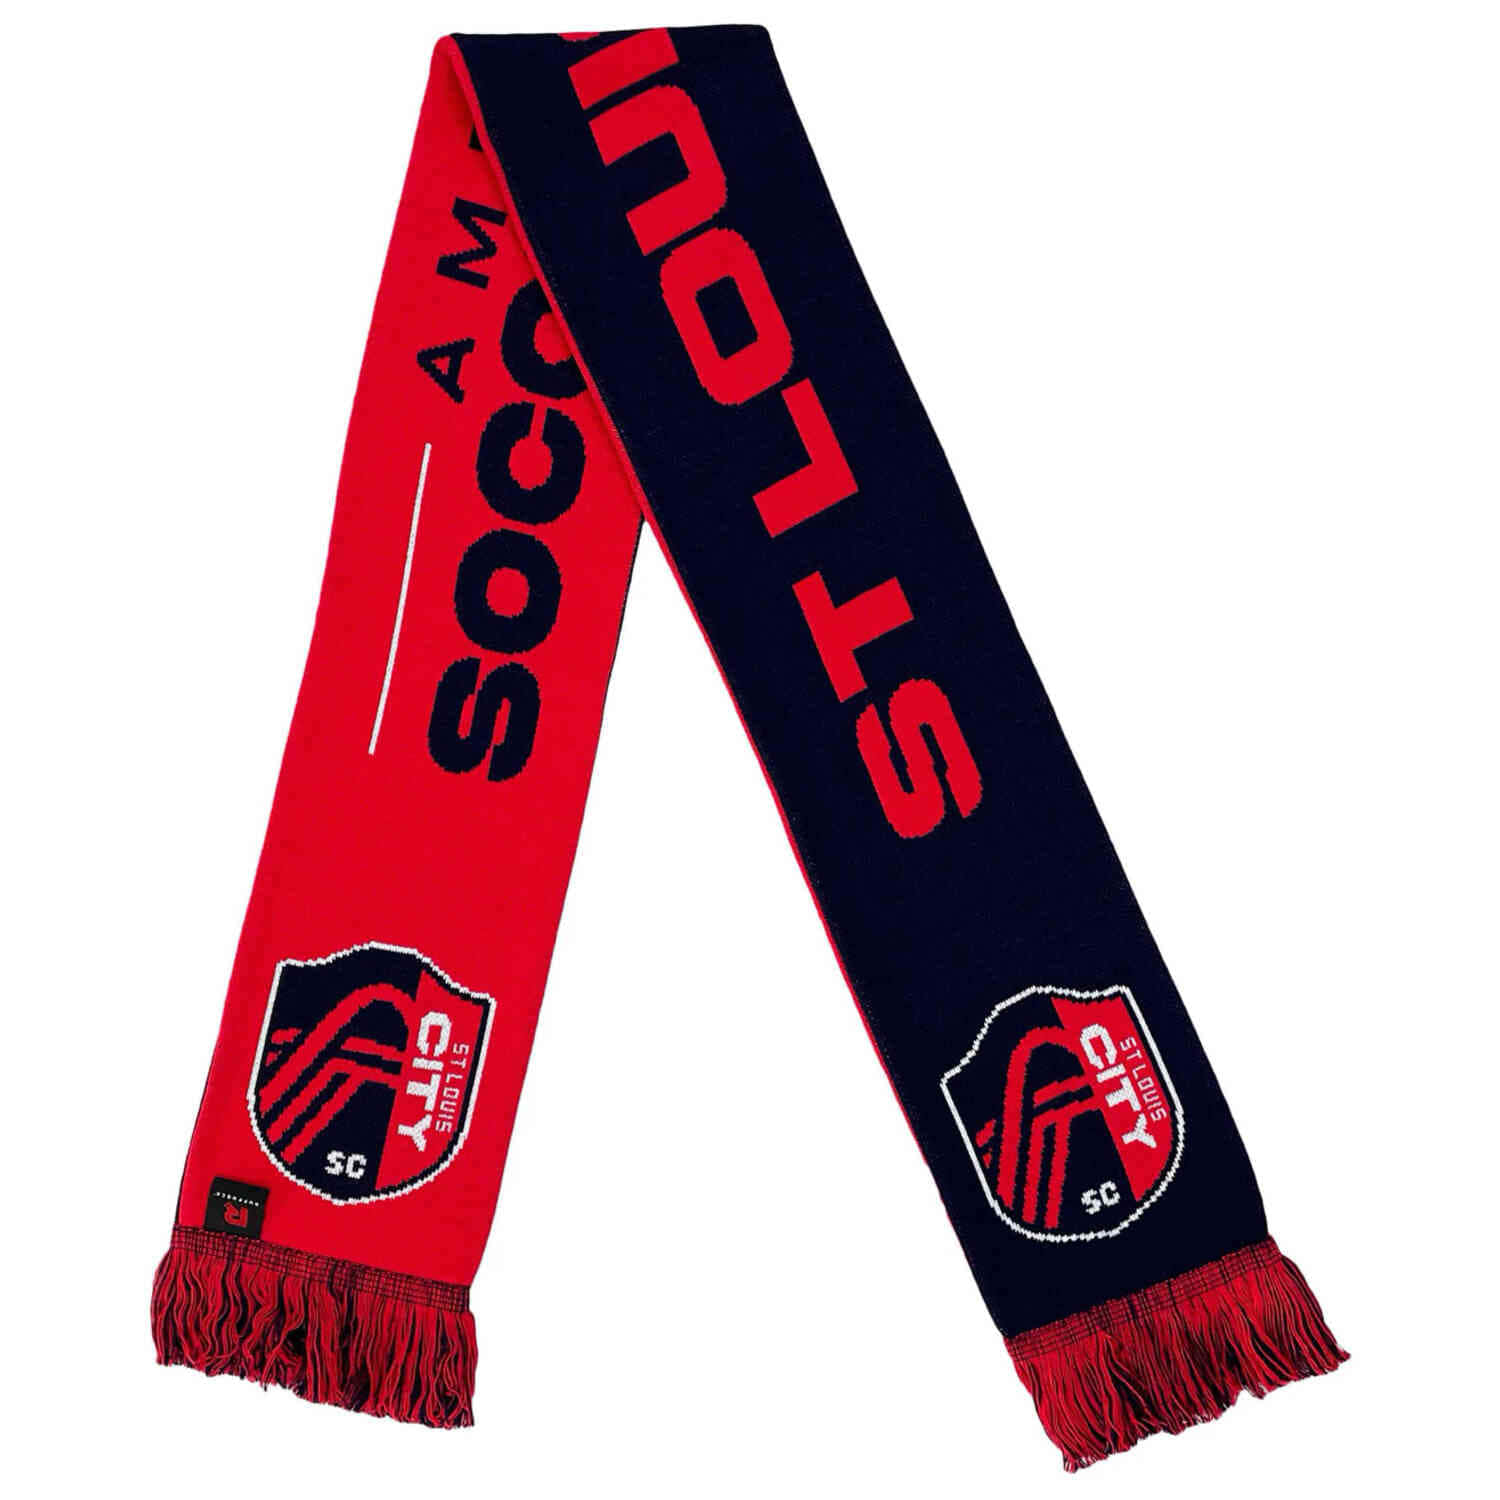 Stlouis City Sc Ruffneck Scarves Can Be Translated To Spanish As 